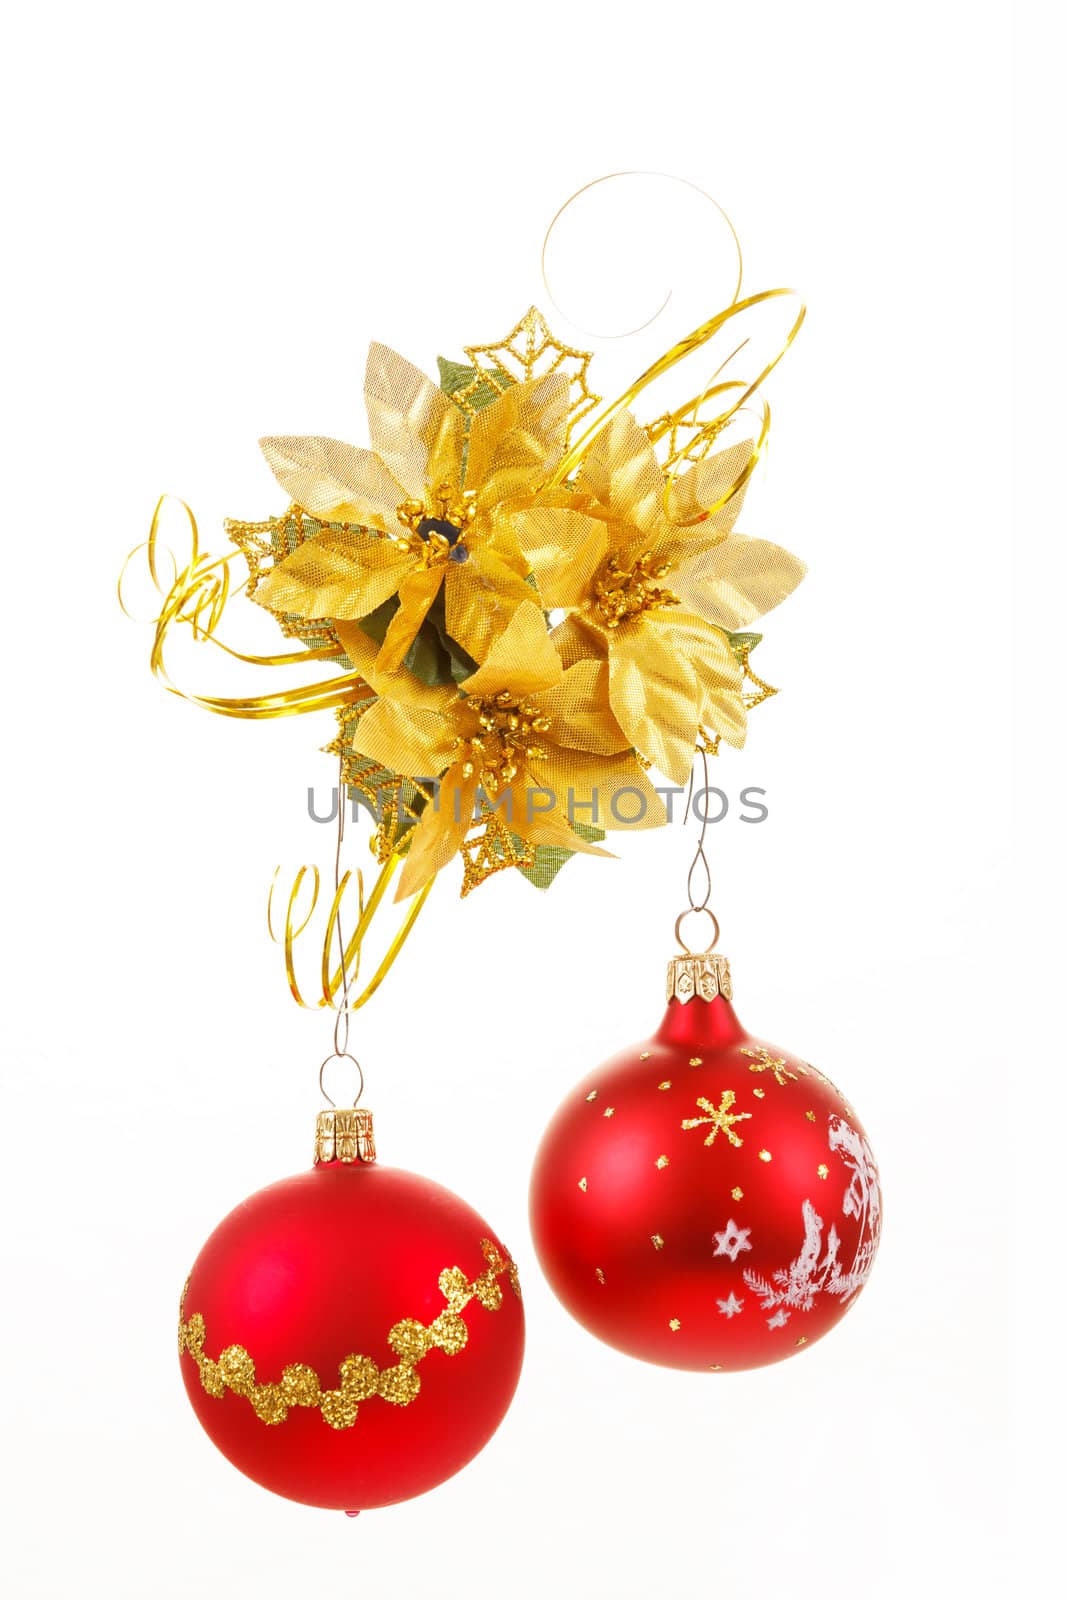 Red christmas balls with decorations on white